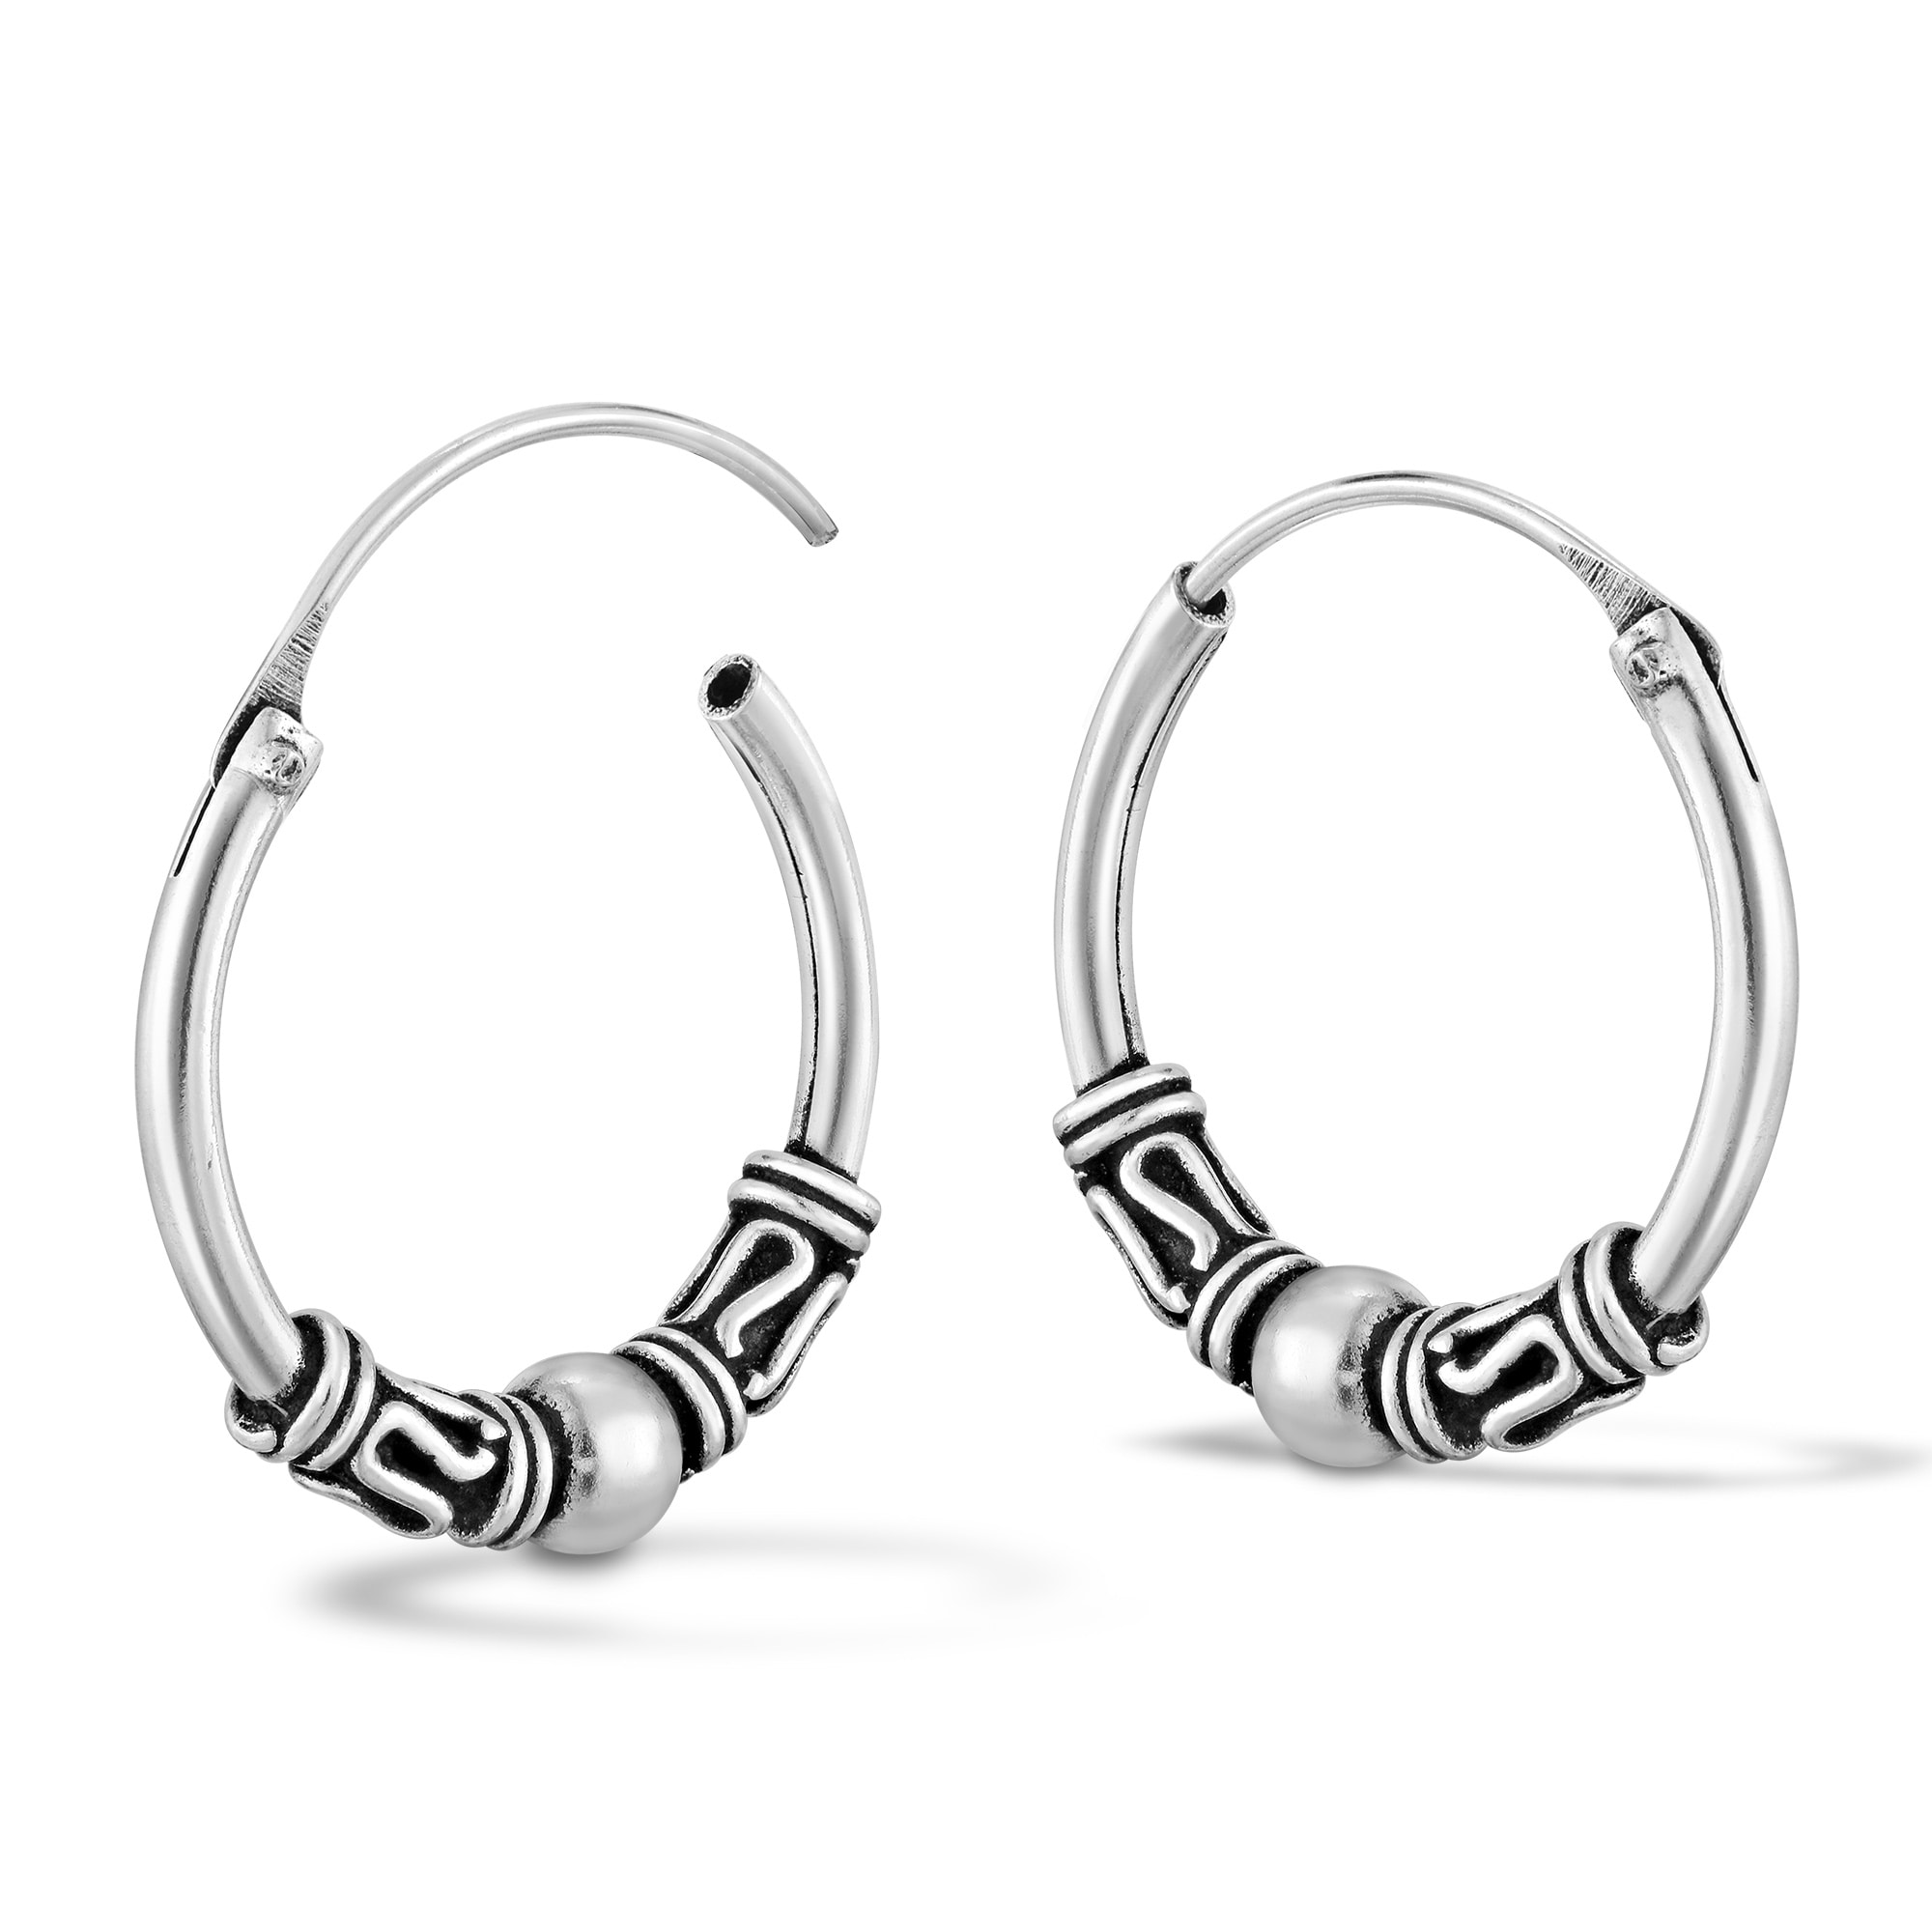 Vintage Style Handwork Jewelry for Her NEW 925 Sterling Silver ART Earrings